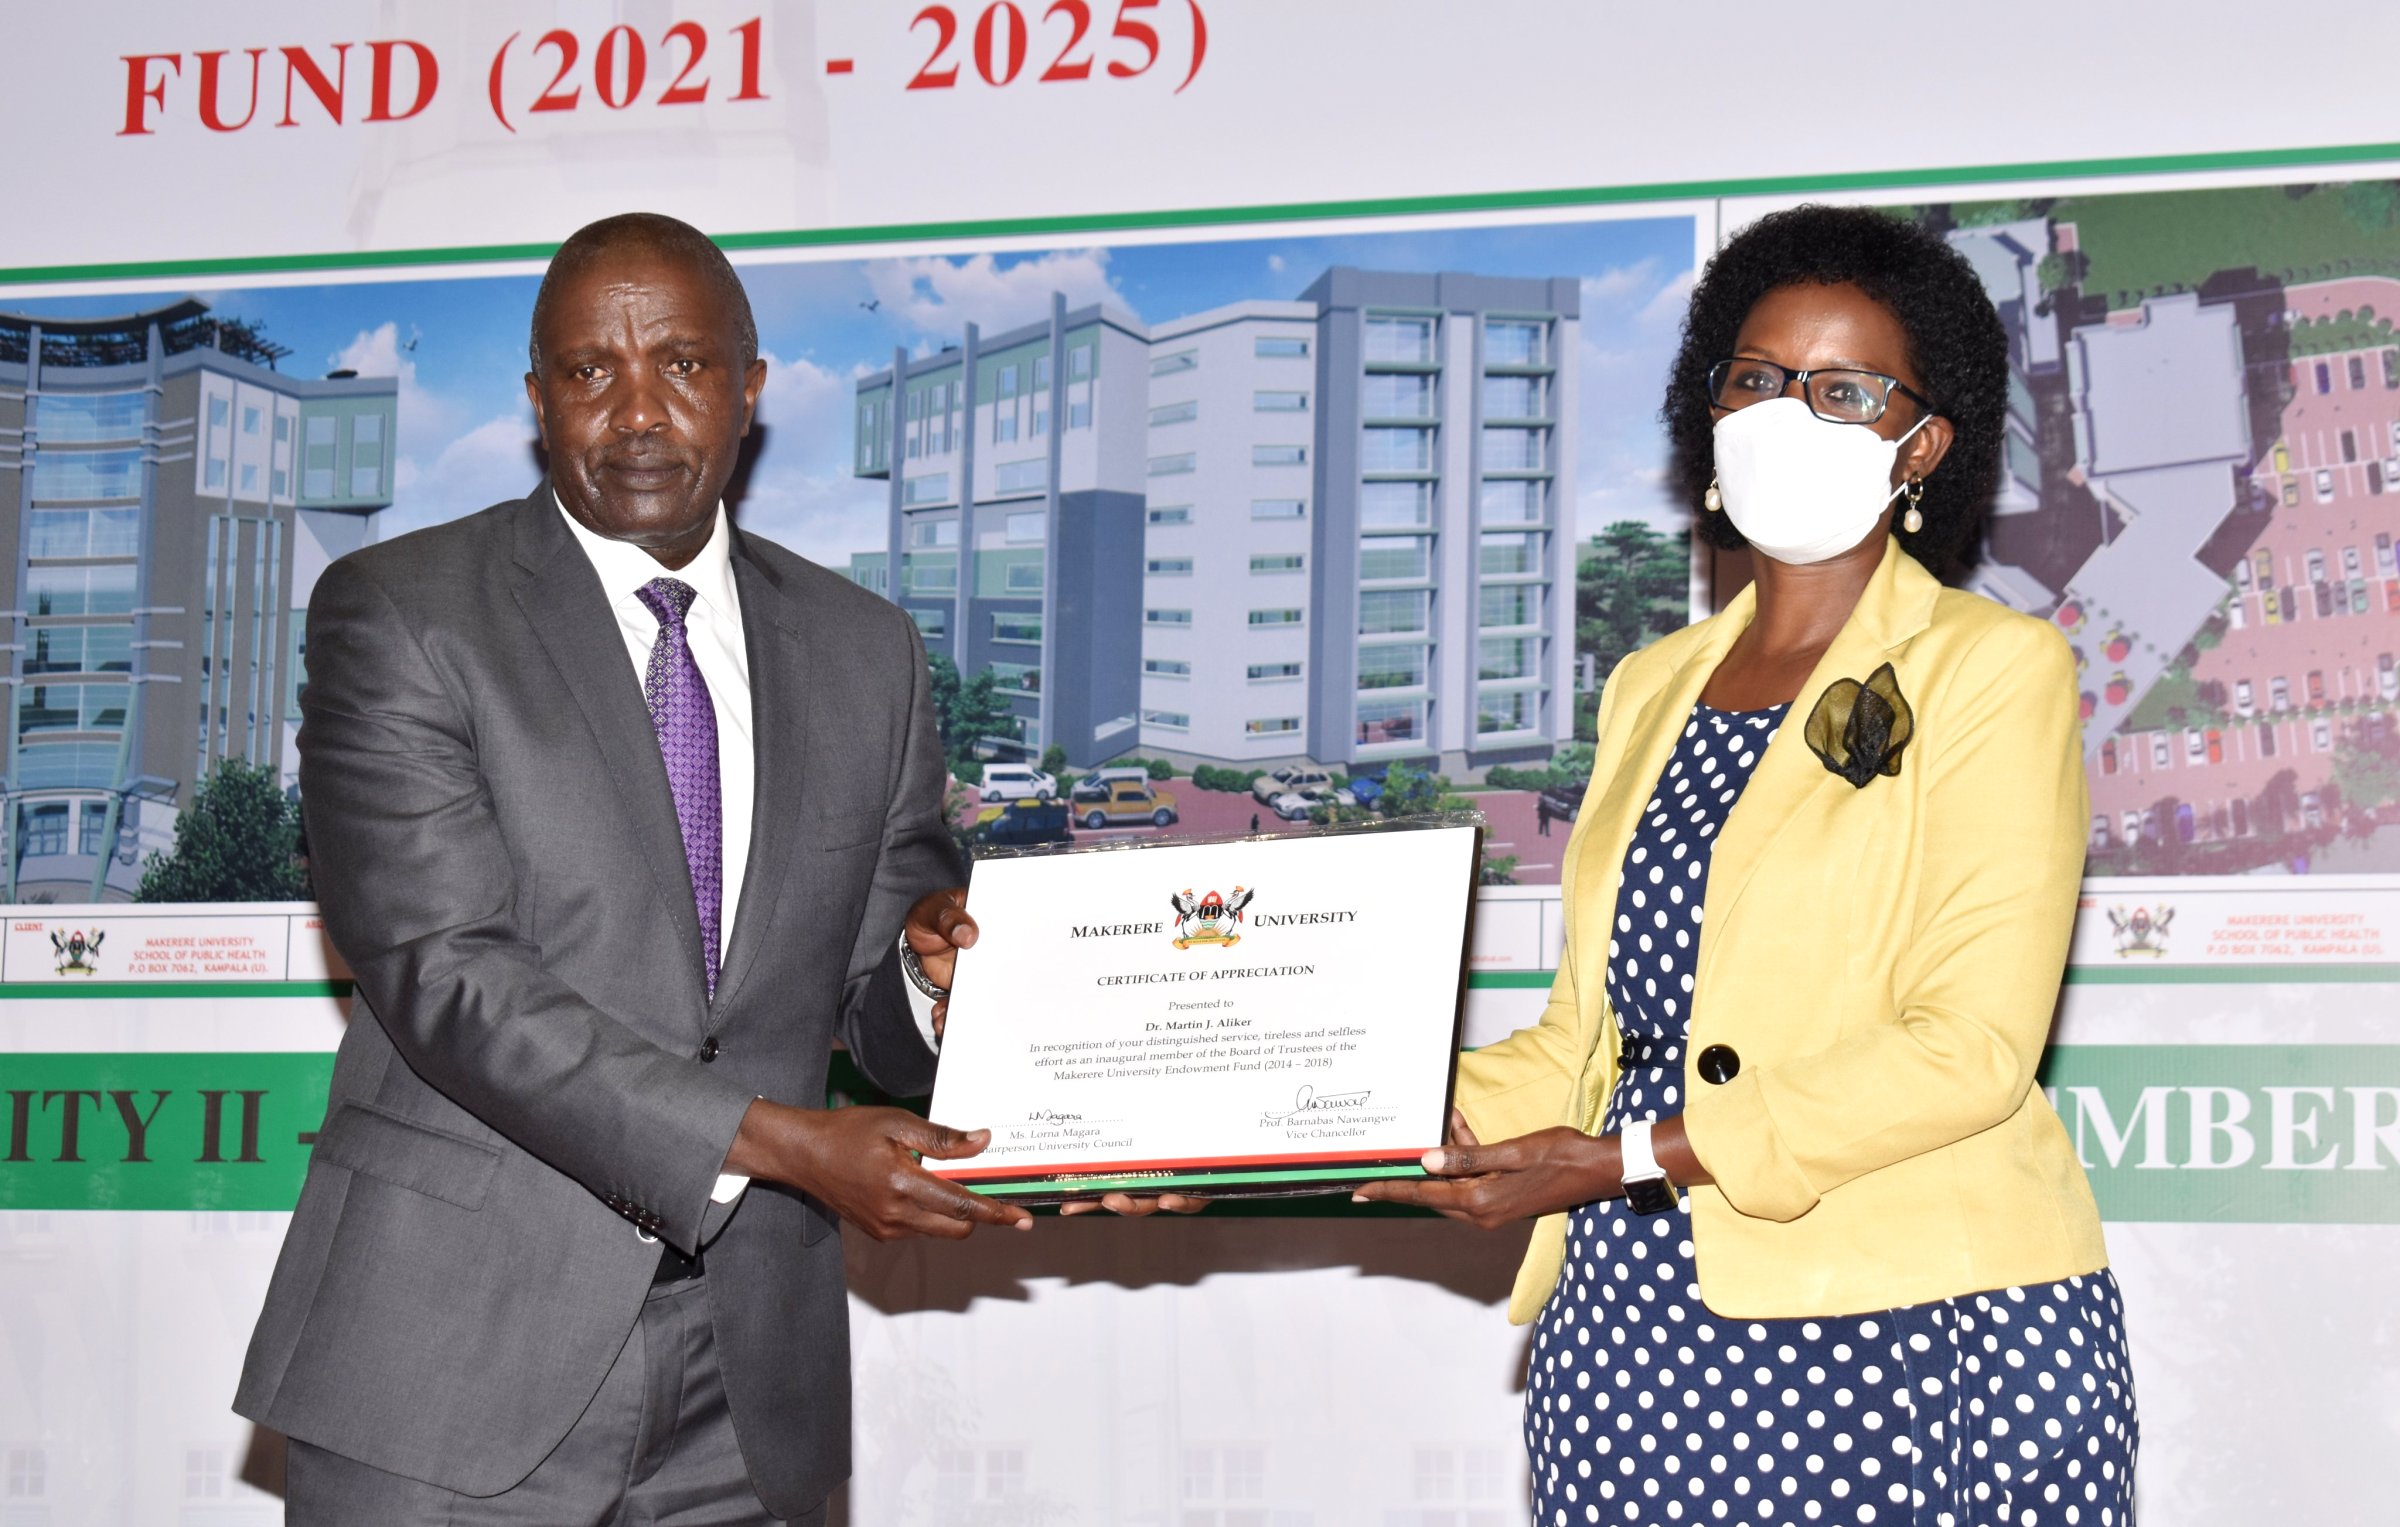 The Chairperson of Council, Mrs. Lorna Magara (R) hands over a Certificate of Appreciation to Mr. Barnabas Tumusingize (L) who received it on behalf of Outgoing Chairperson, Dr. Martin J. Aliker at the MakEF Board Inauguration on 30th September 2021, CTF2 Auditorium, Makerere University.